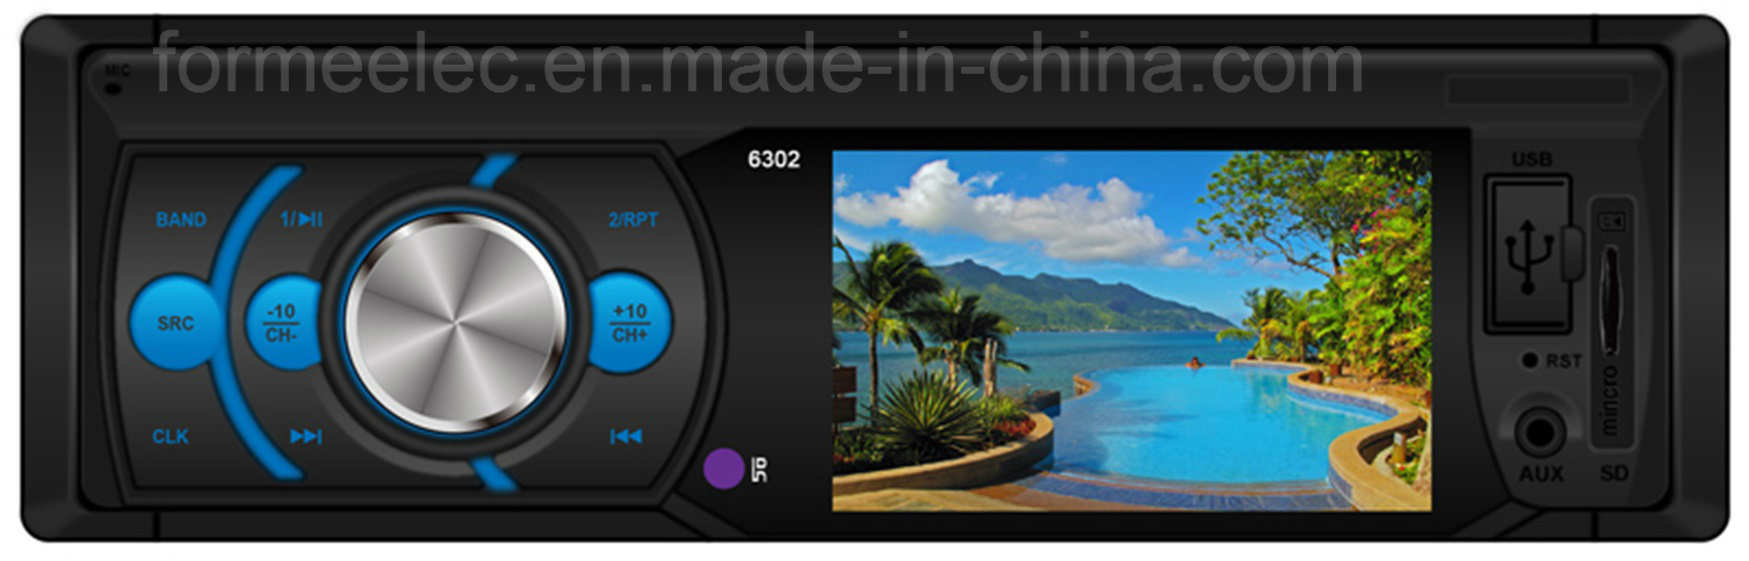 3 Inch LCD Car MP5 Player with USB SD